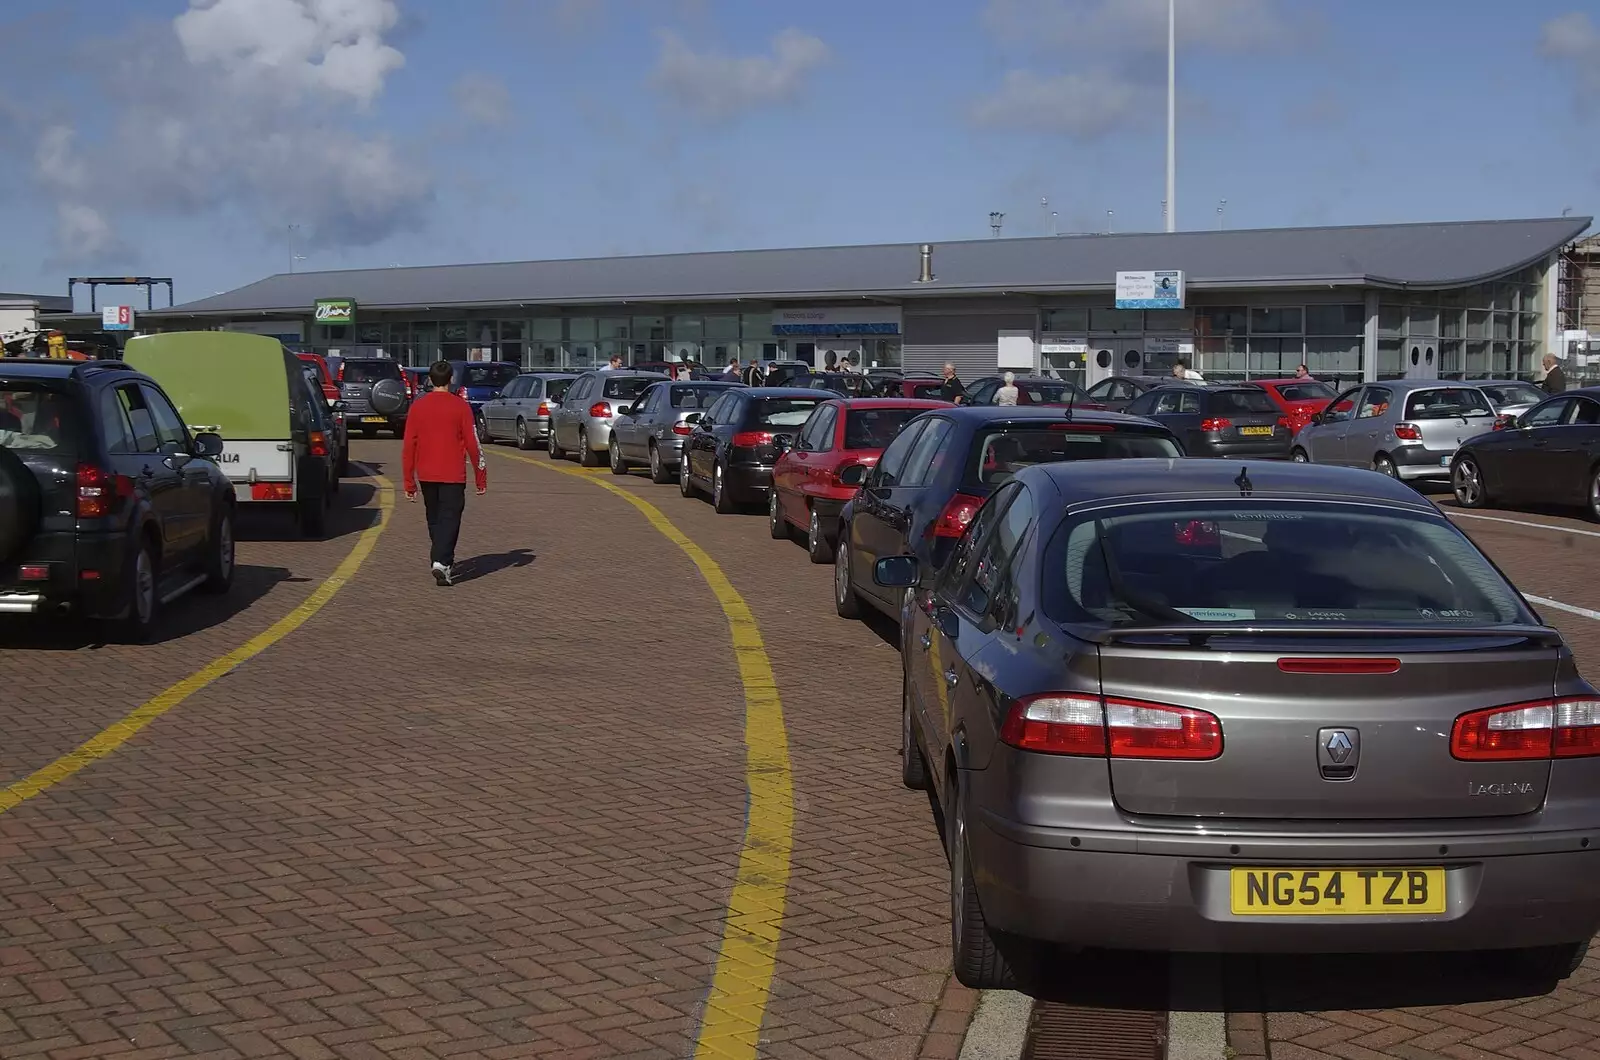 The queue of cars at Holyhead ferry terminal, from A Road Trip to Ireland Via Sandbach and Conwy, Cheshire and Wales - 21st September 2007